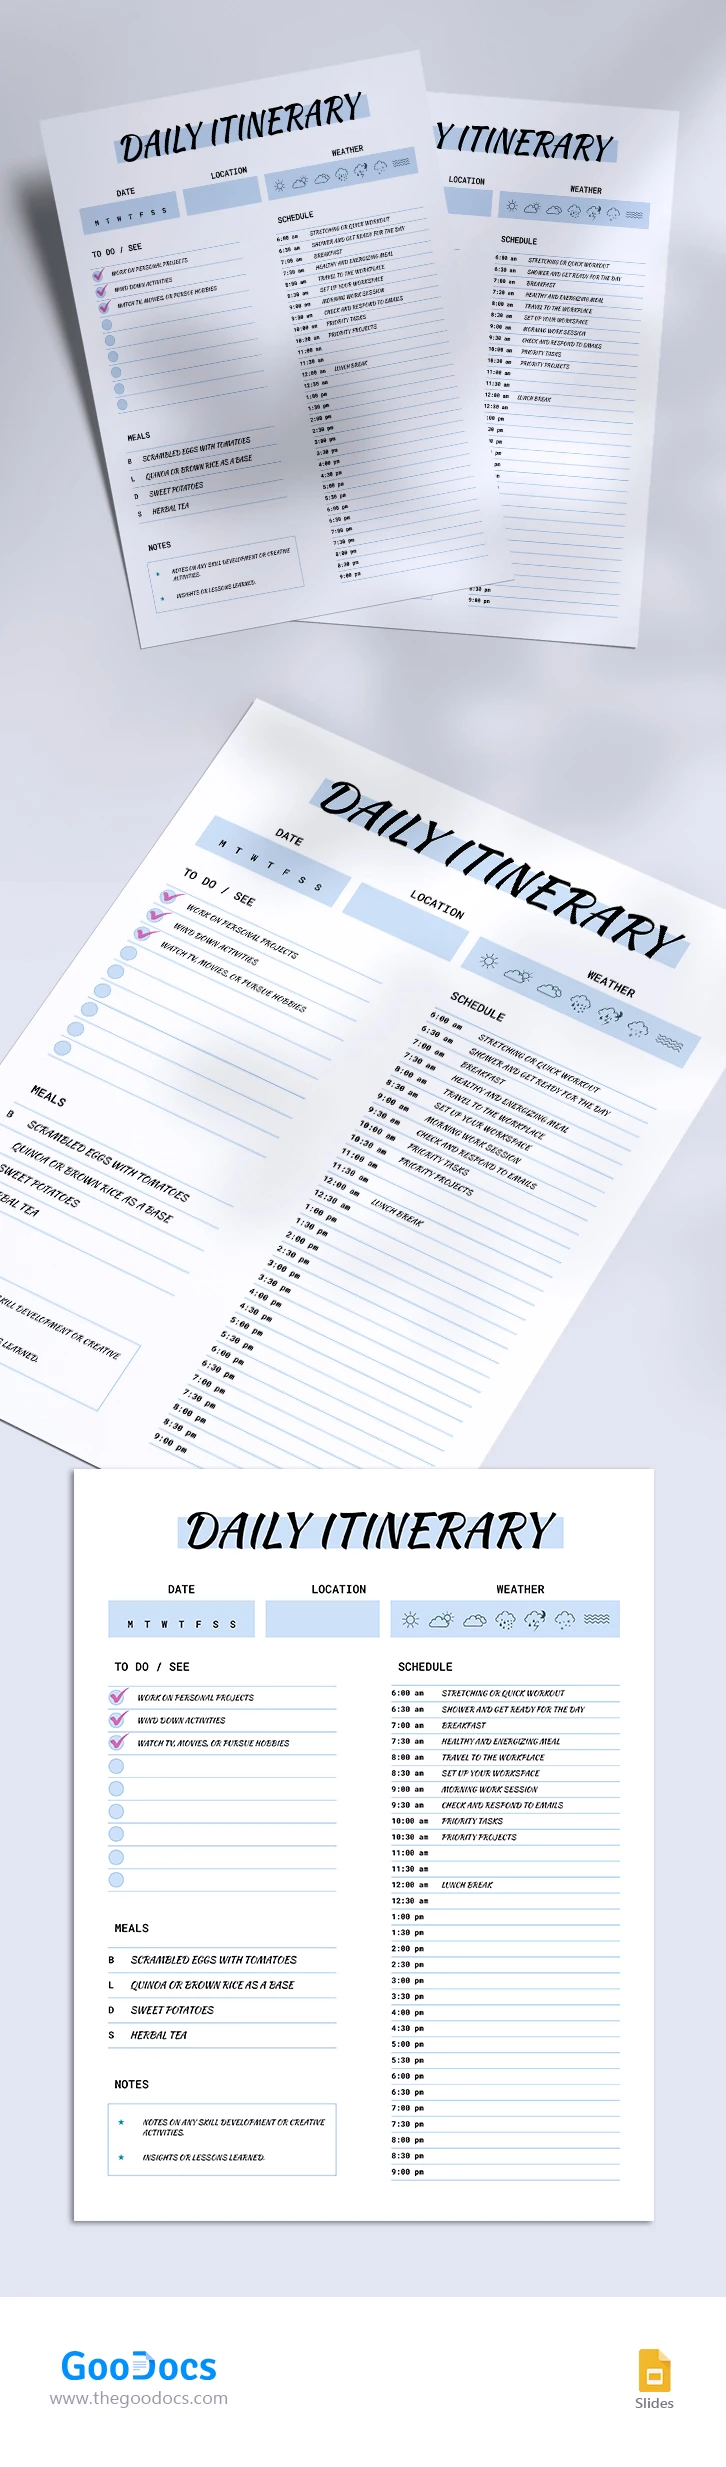 Simple Daily Itinerary - free Google Docs Template - 10067427